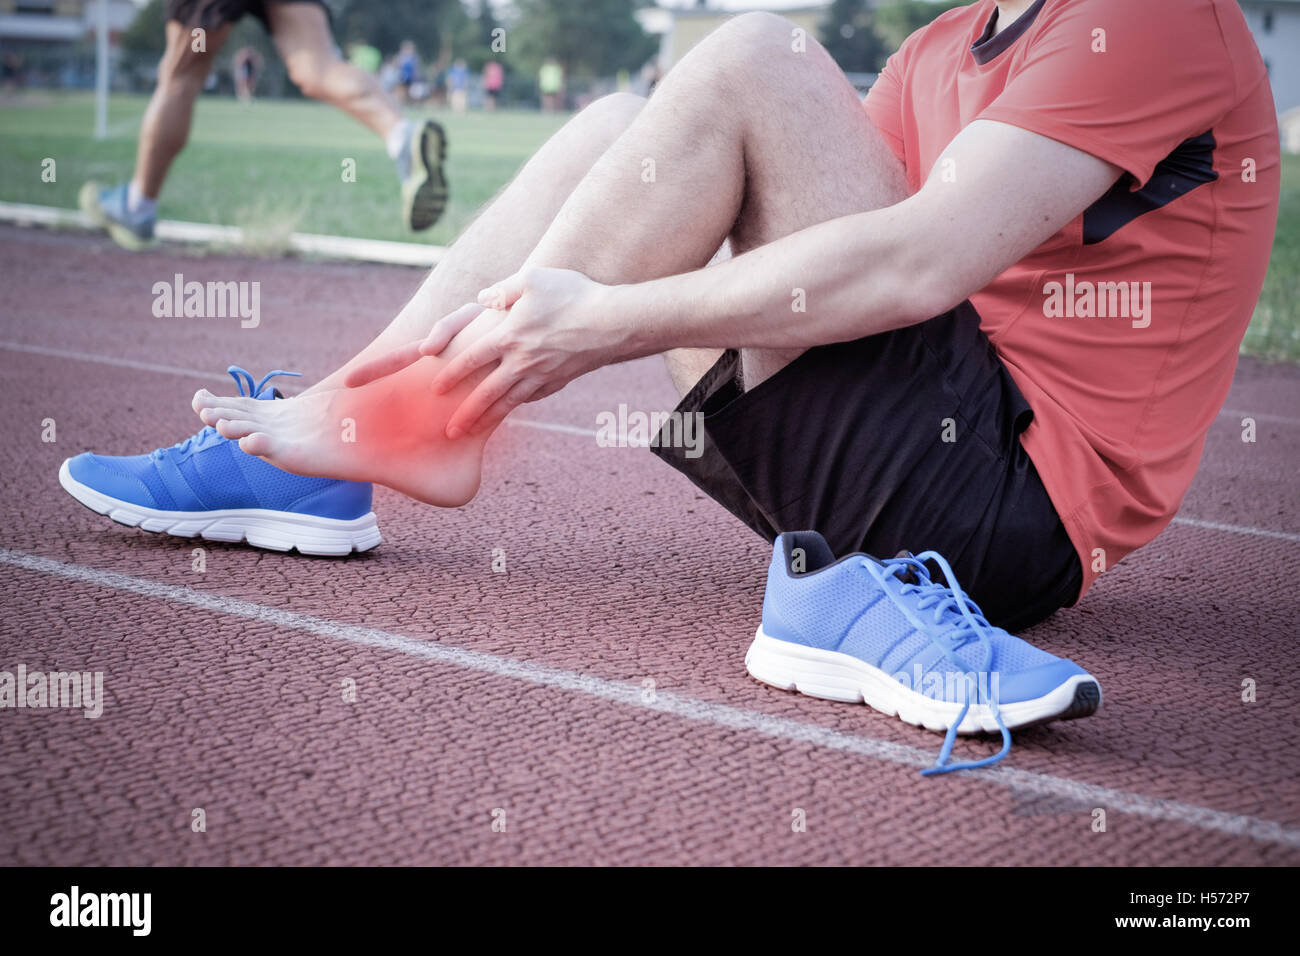 Runner with injured ankle on the track Stock Photo